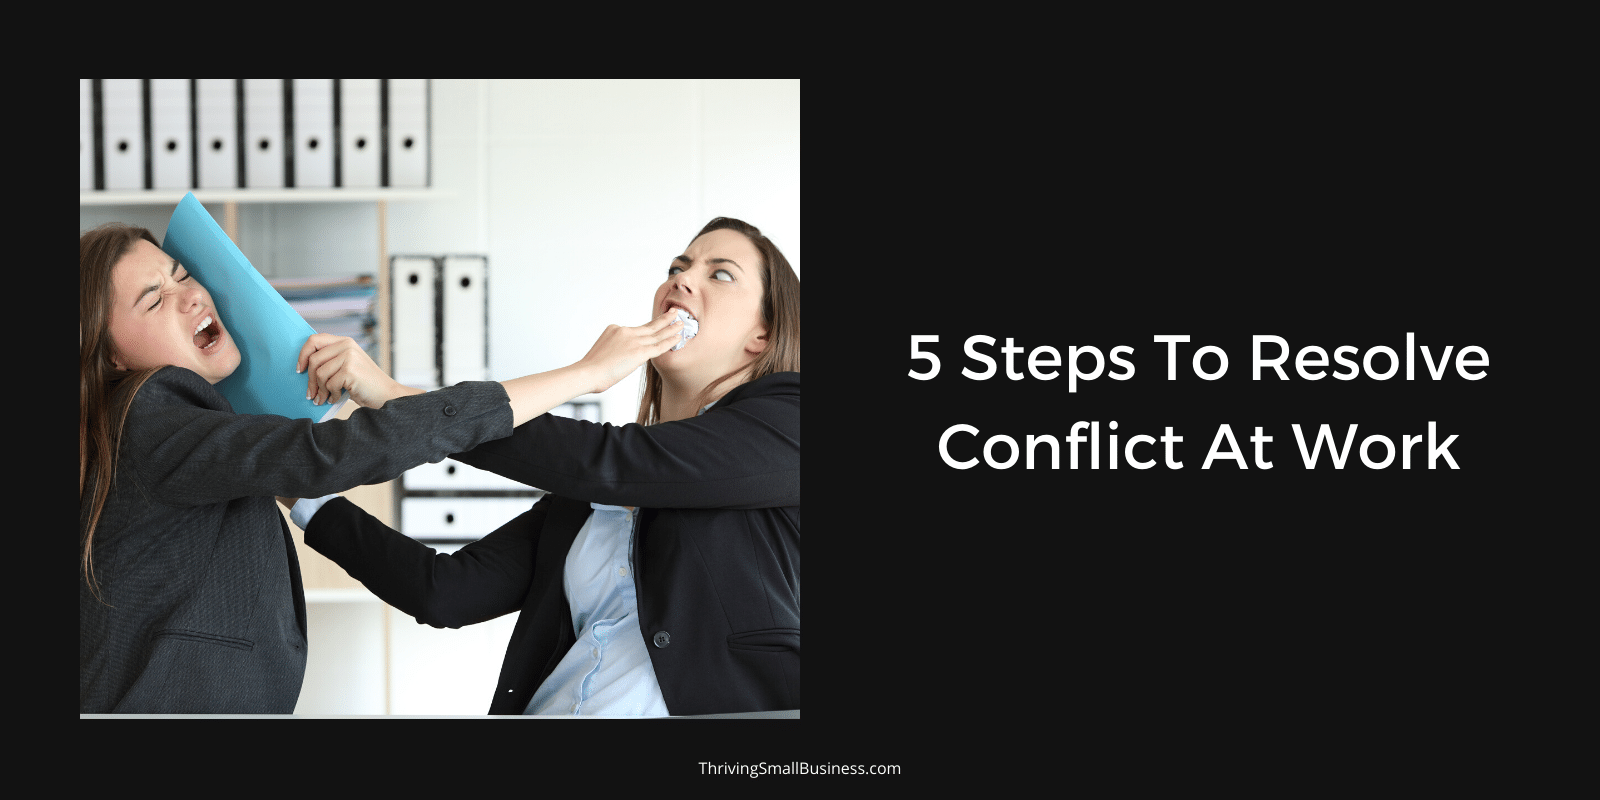 5 Steps To Conflict Resolution In The Workplace The Thriving Small Business